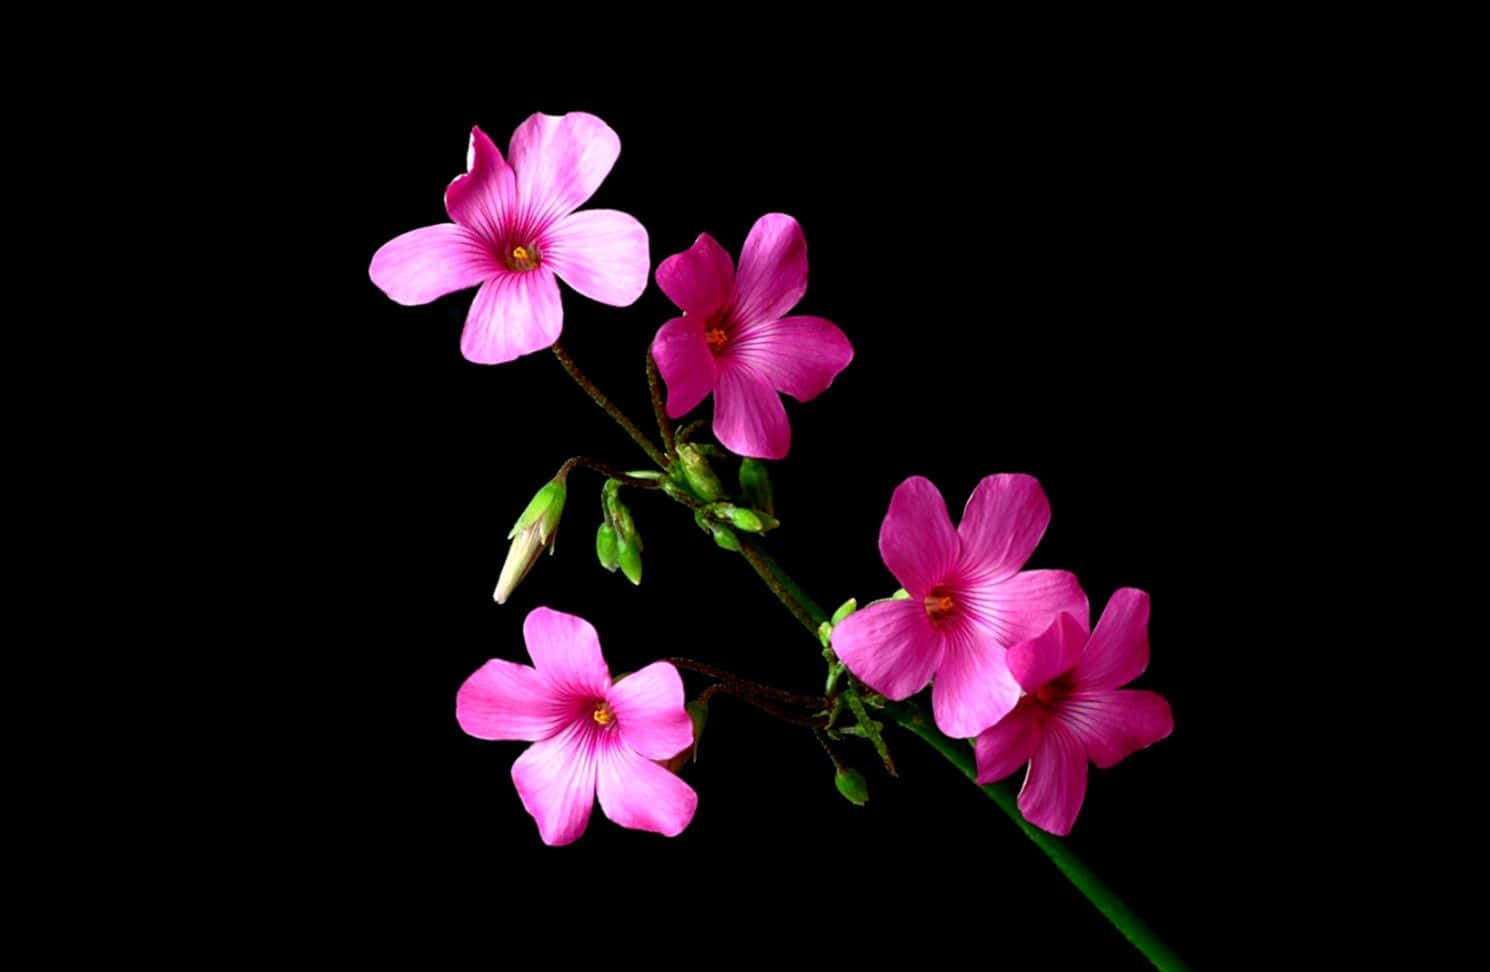 A Pink Flower Is On A Stem Against A Black Background Background